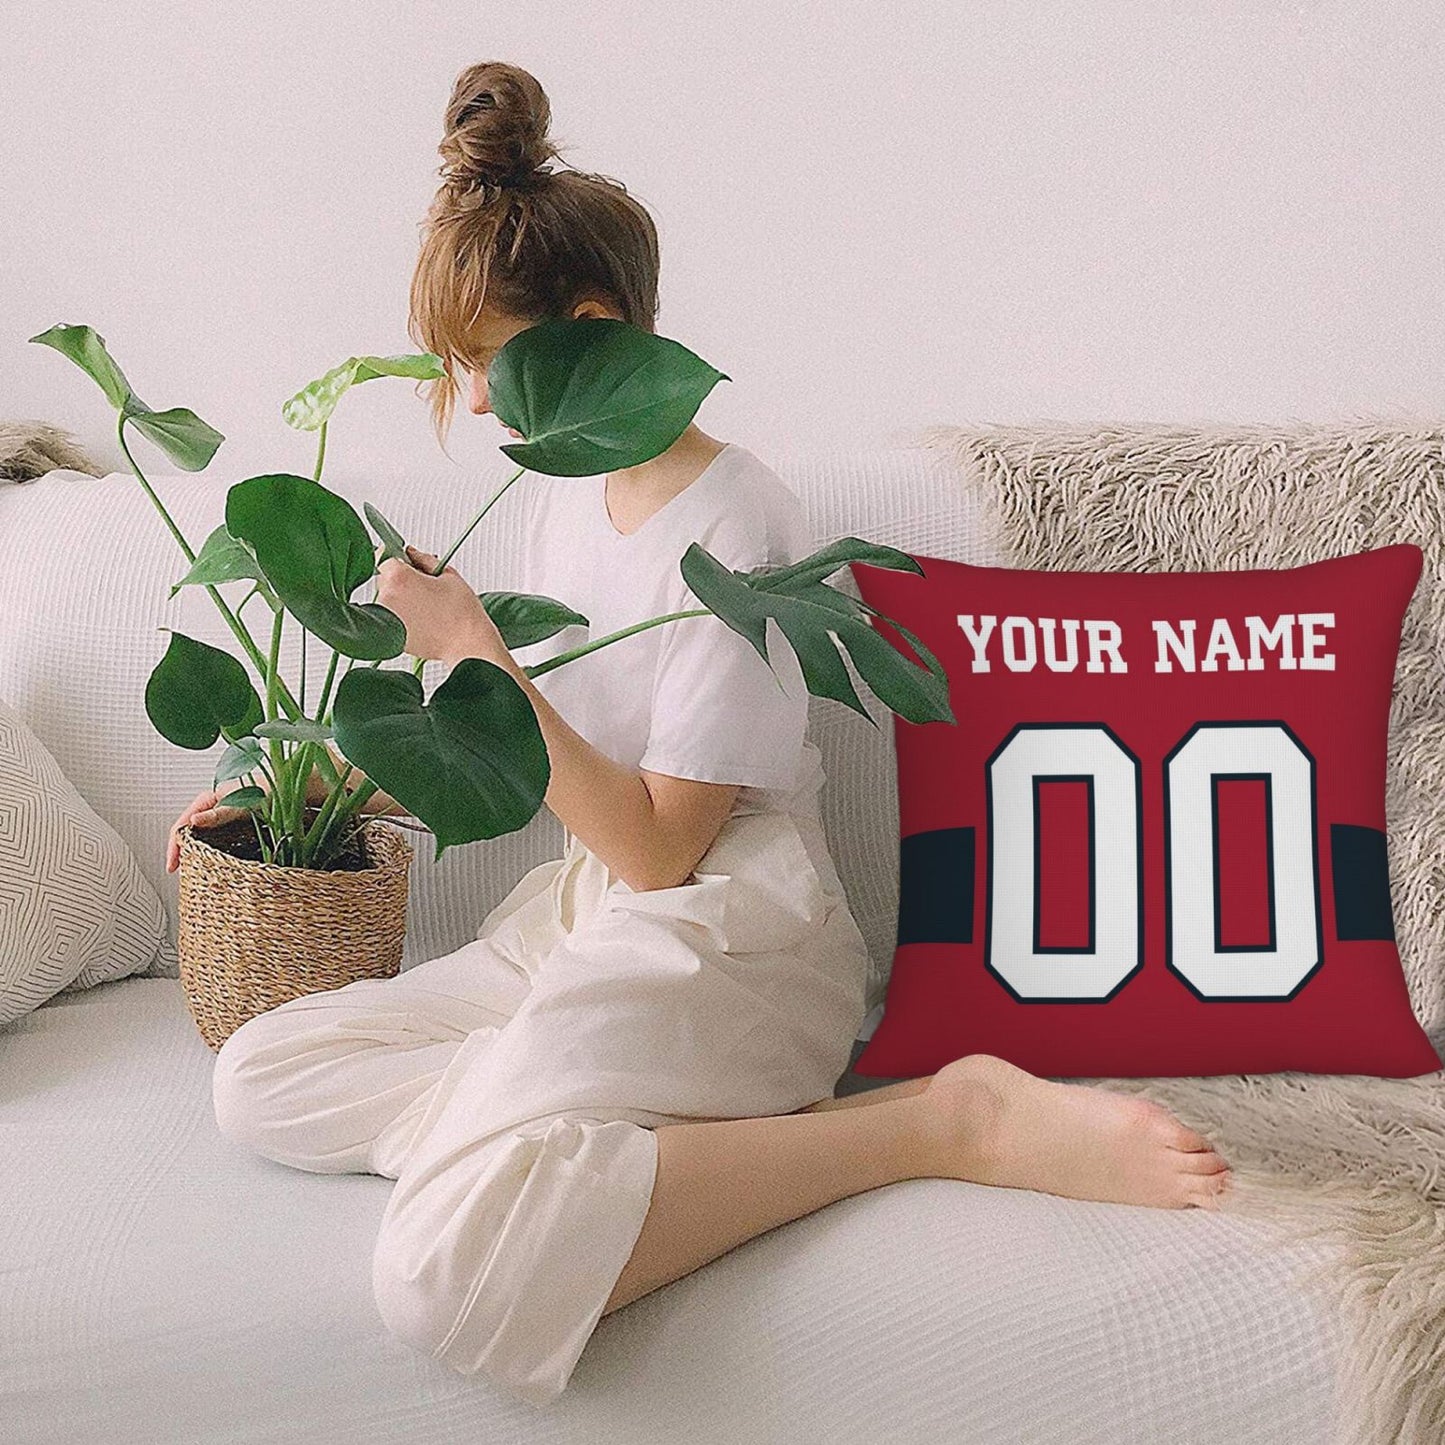 Customized Houston Texans Football Team Decorative Throw Pillow Case Print Personalized Football Style Fans Letters & Number Red Pillowcase Birthday Gift